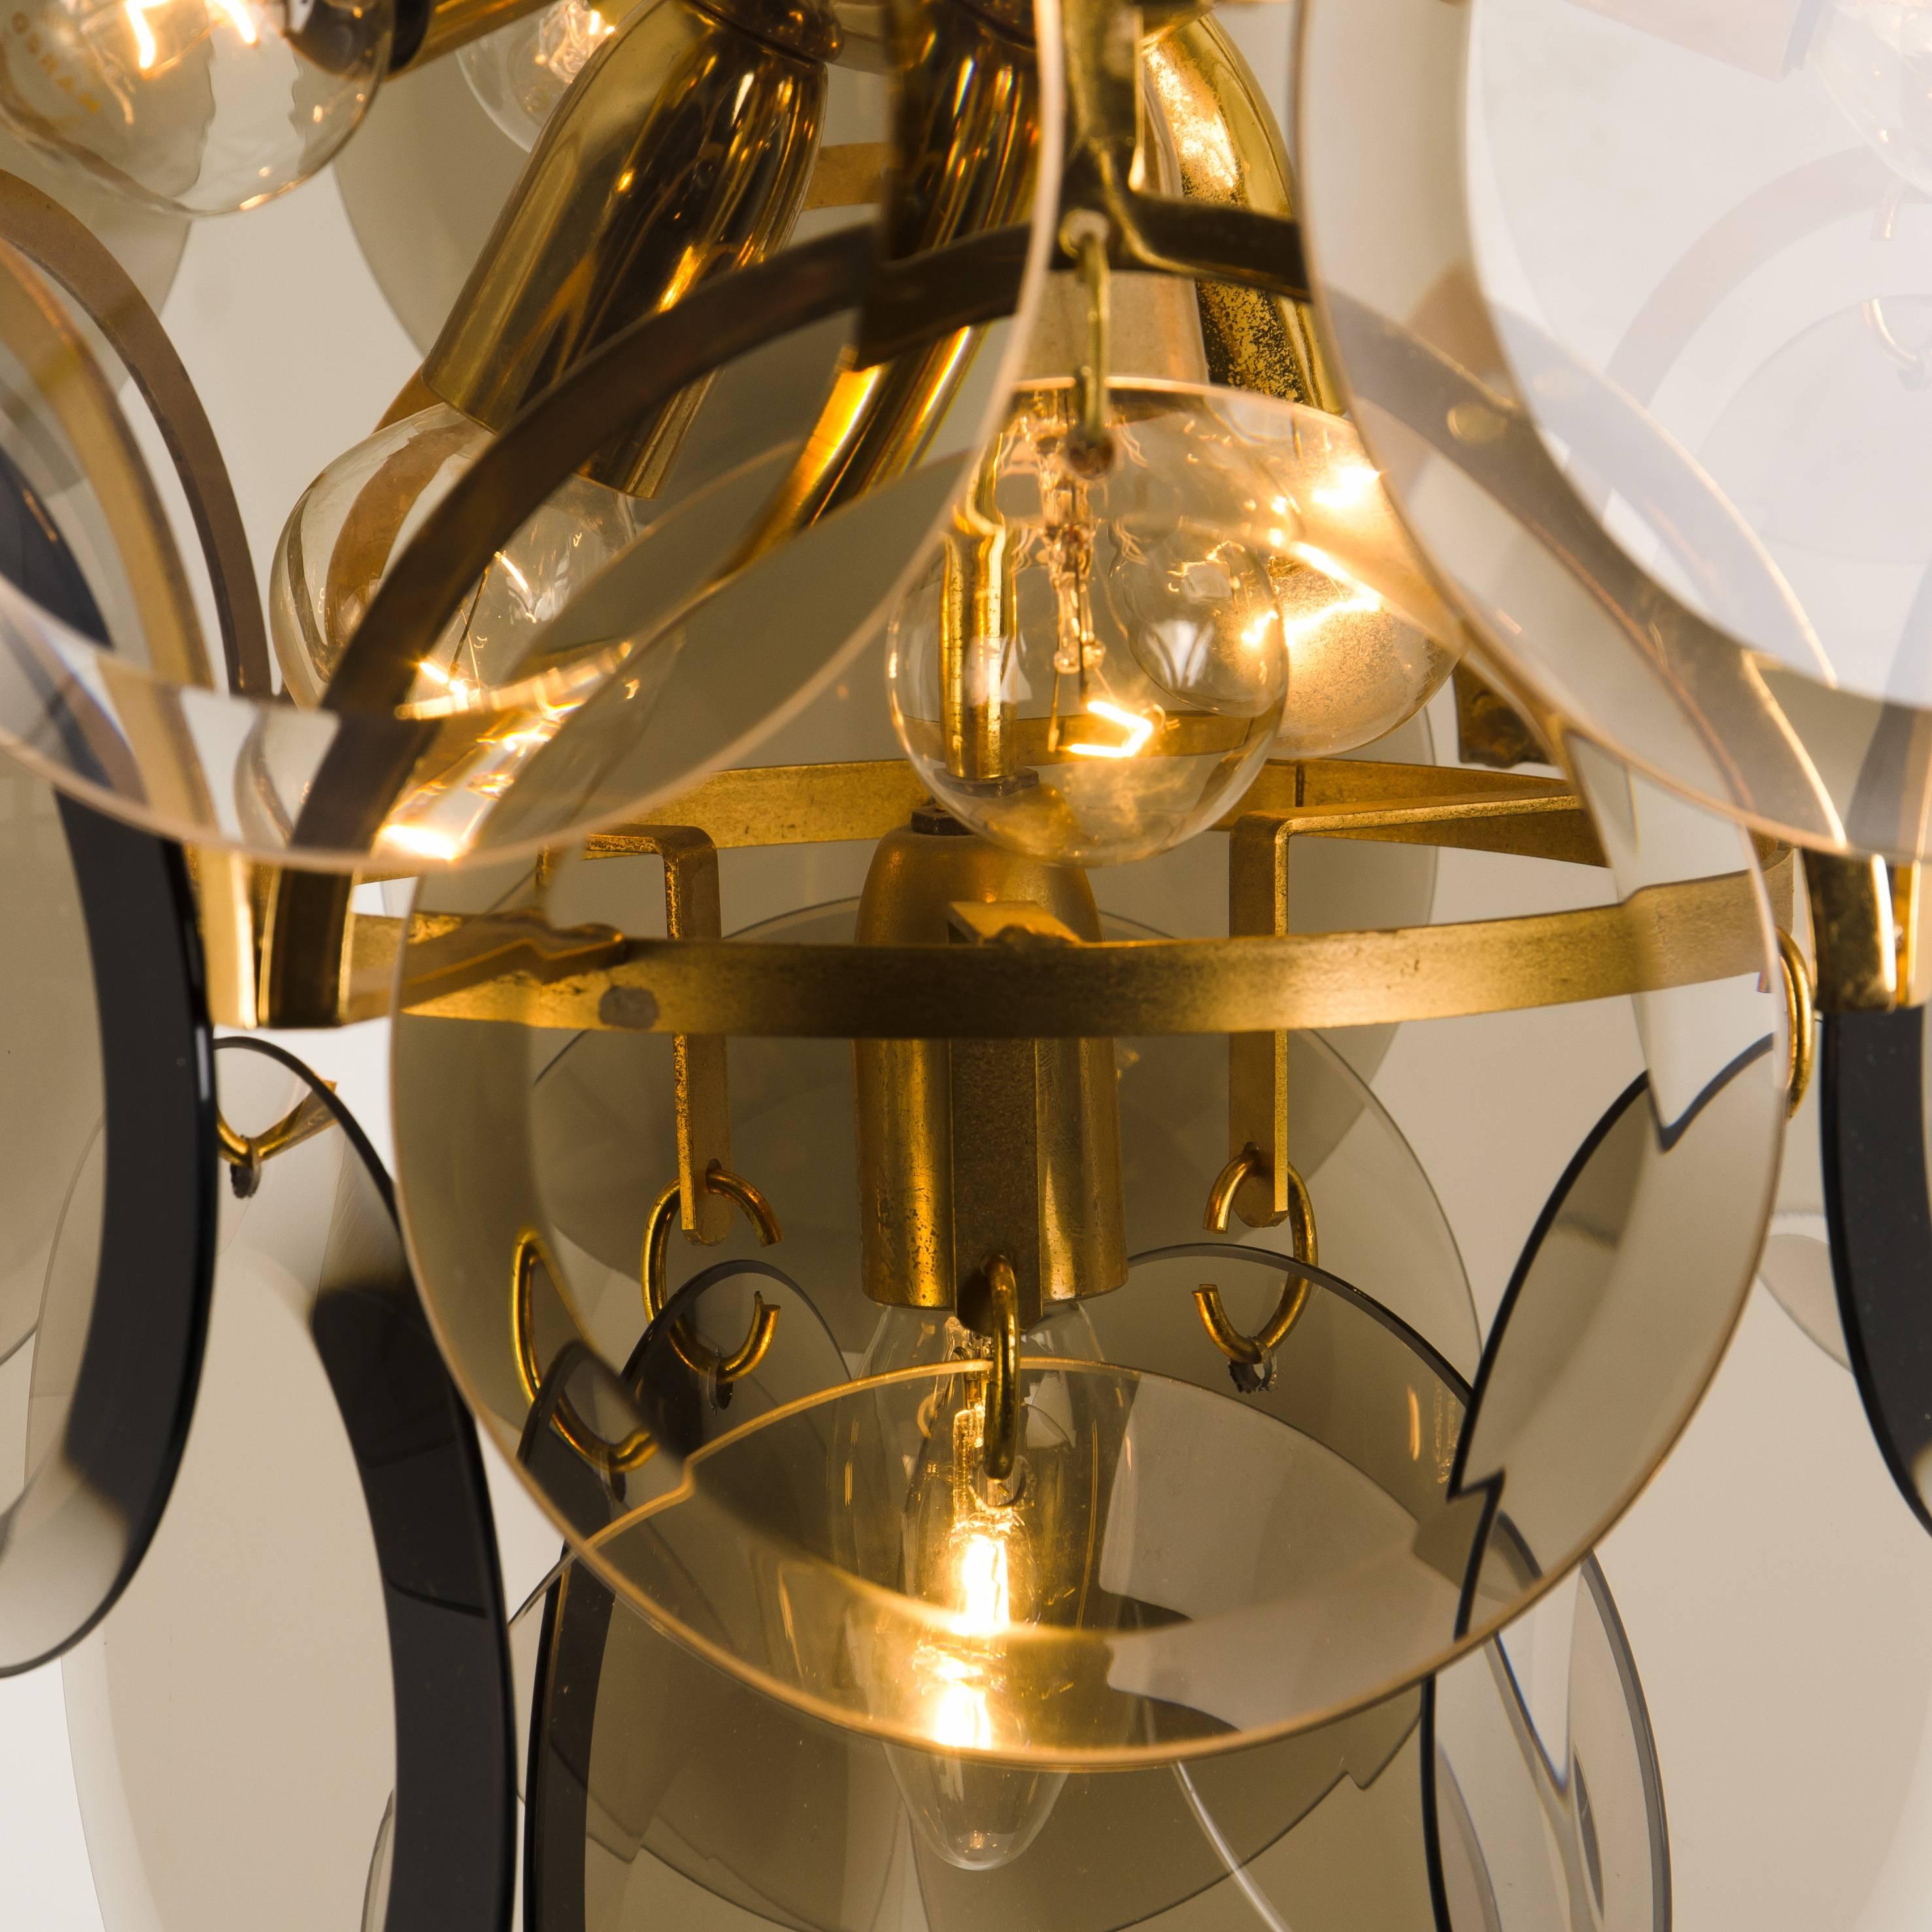 Galvanized Smoked Glass and Brass Chandelier Attributed to Vistosi, Italy, 1970s